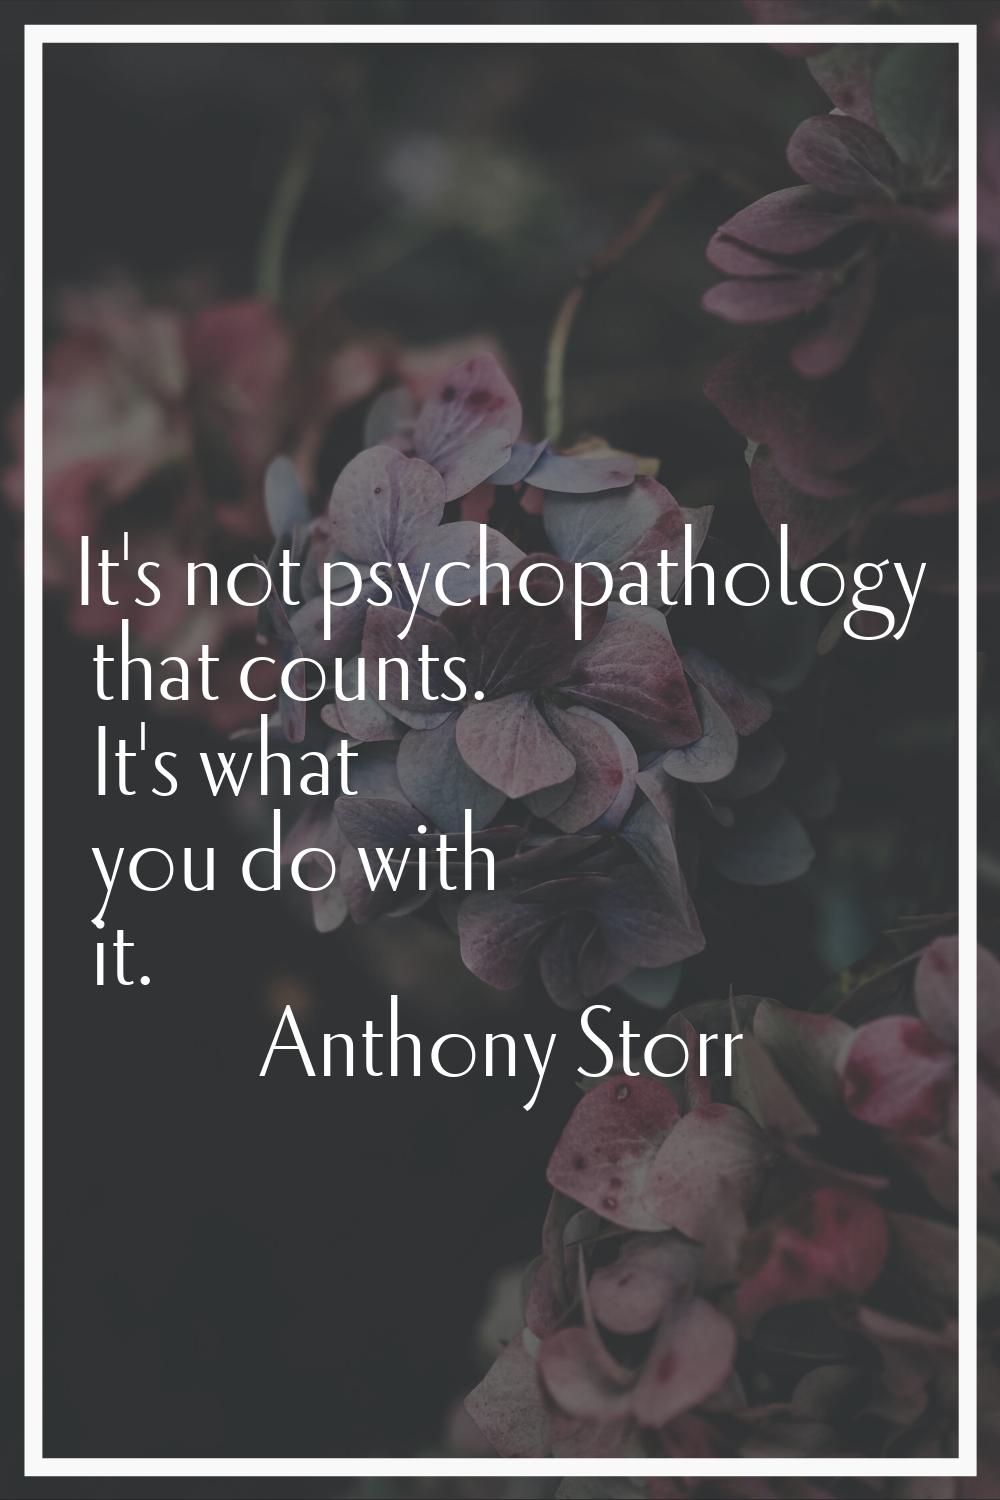 It's not psychopathology that counts. It's what you do with it.